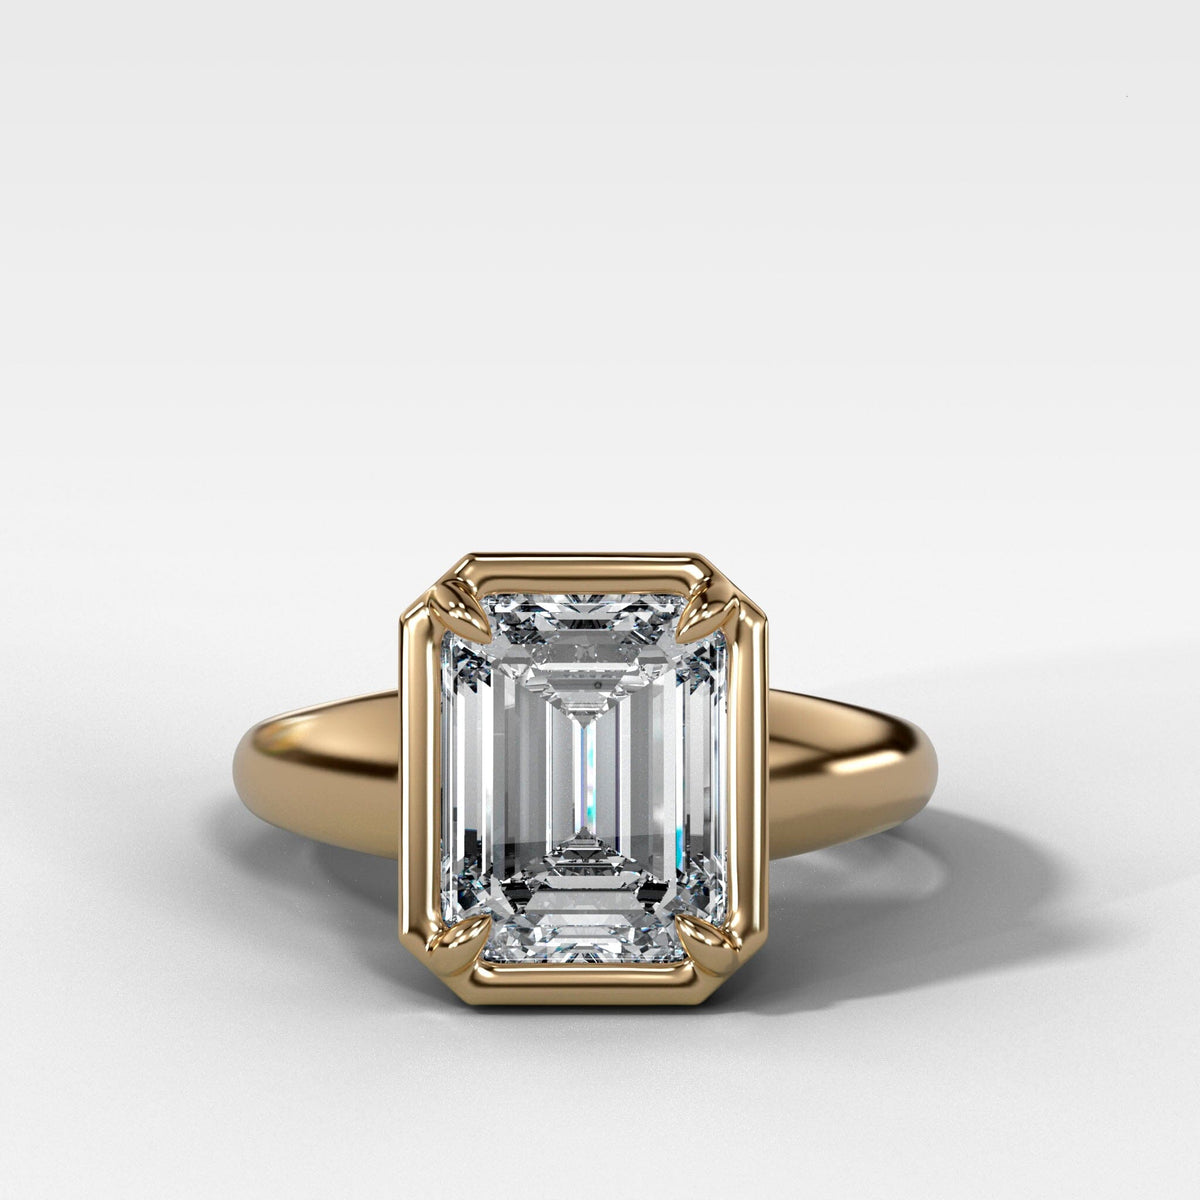 Club Ring Solitaire With an Emerald Cut Engagement Good Stone Inc 